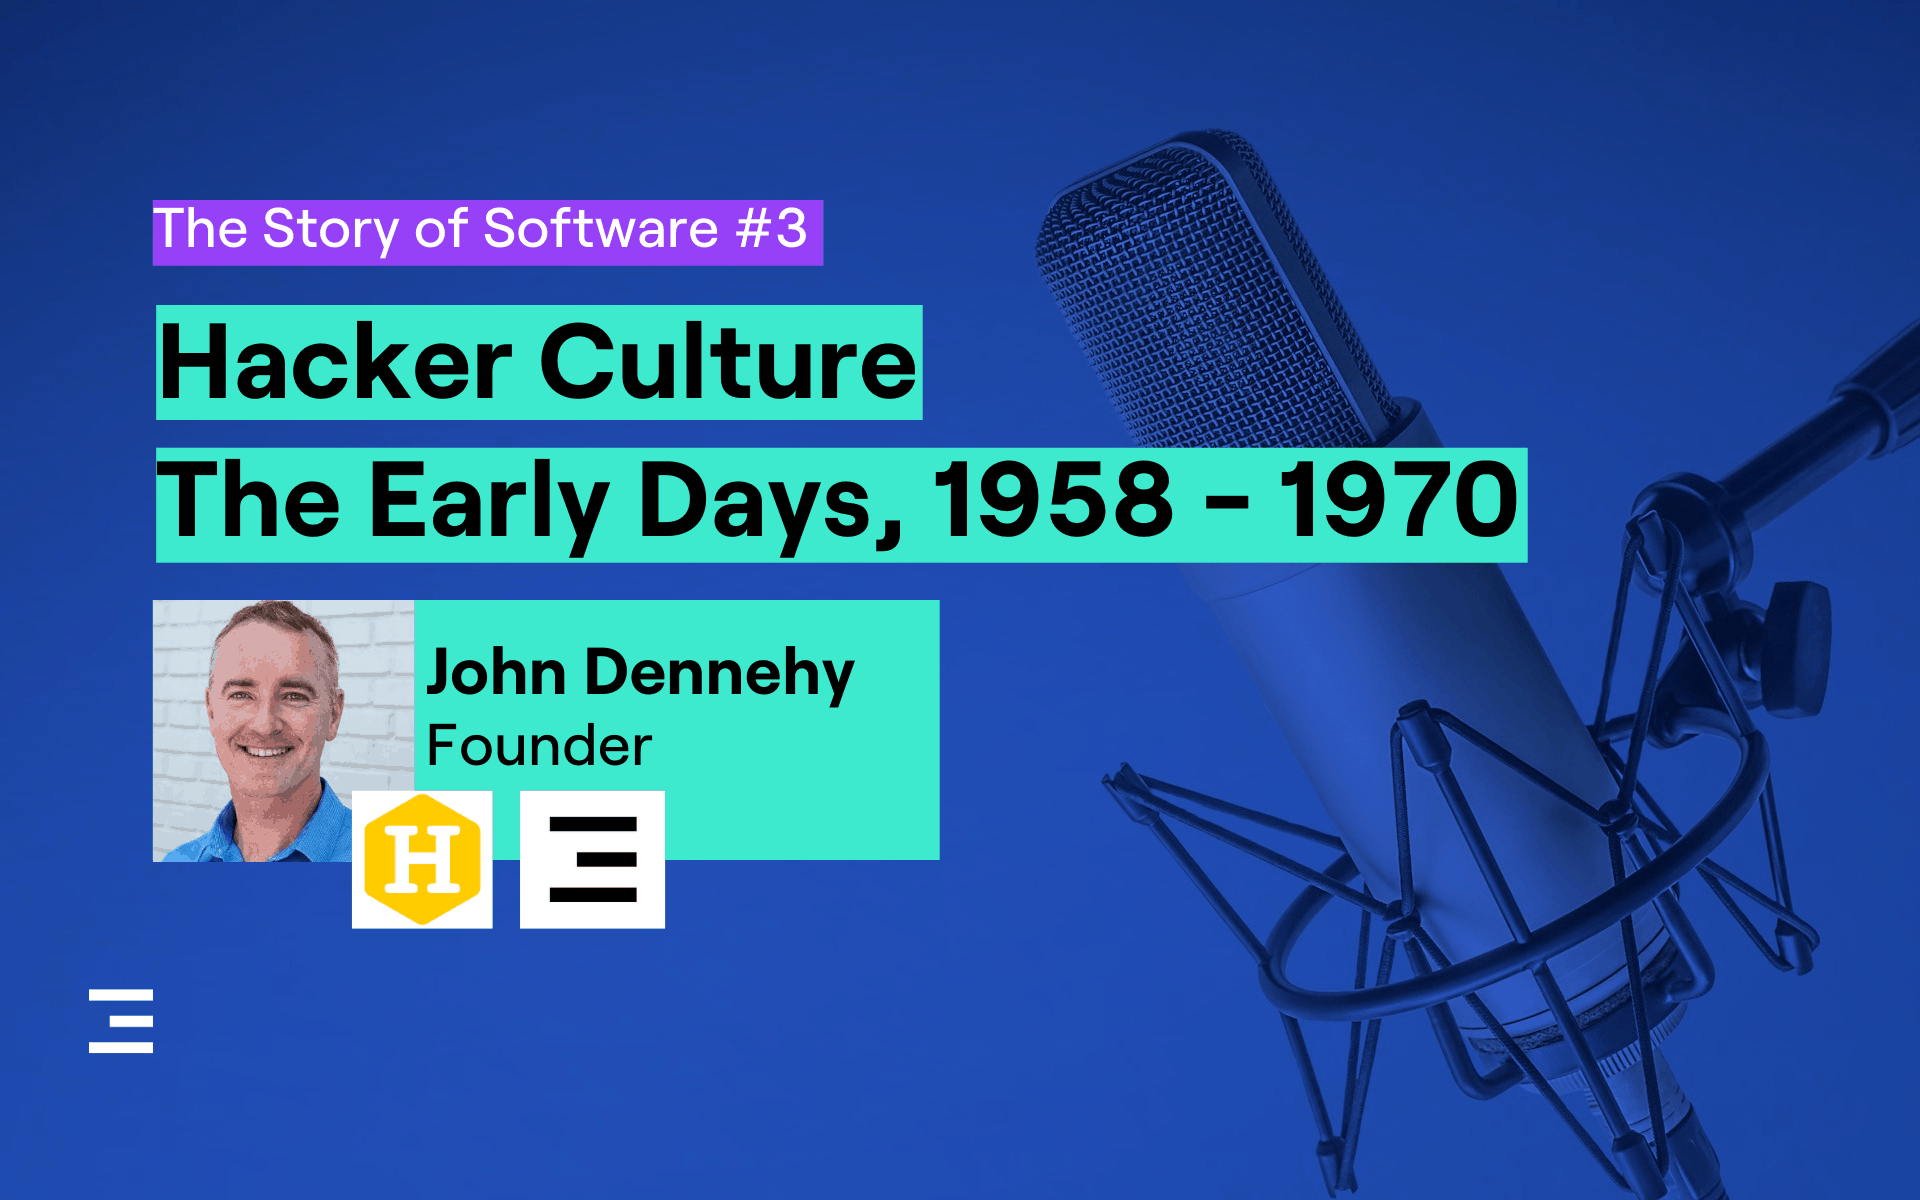 episode 3 of the story of software podcast recorded by Zartis, hacker culture 1958-1970